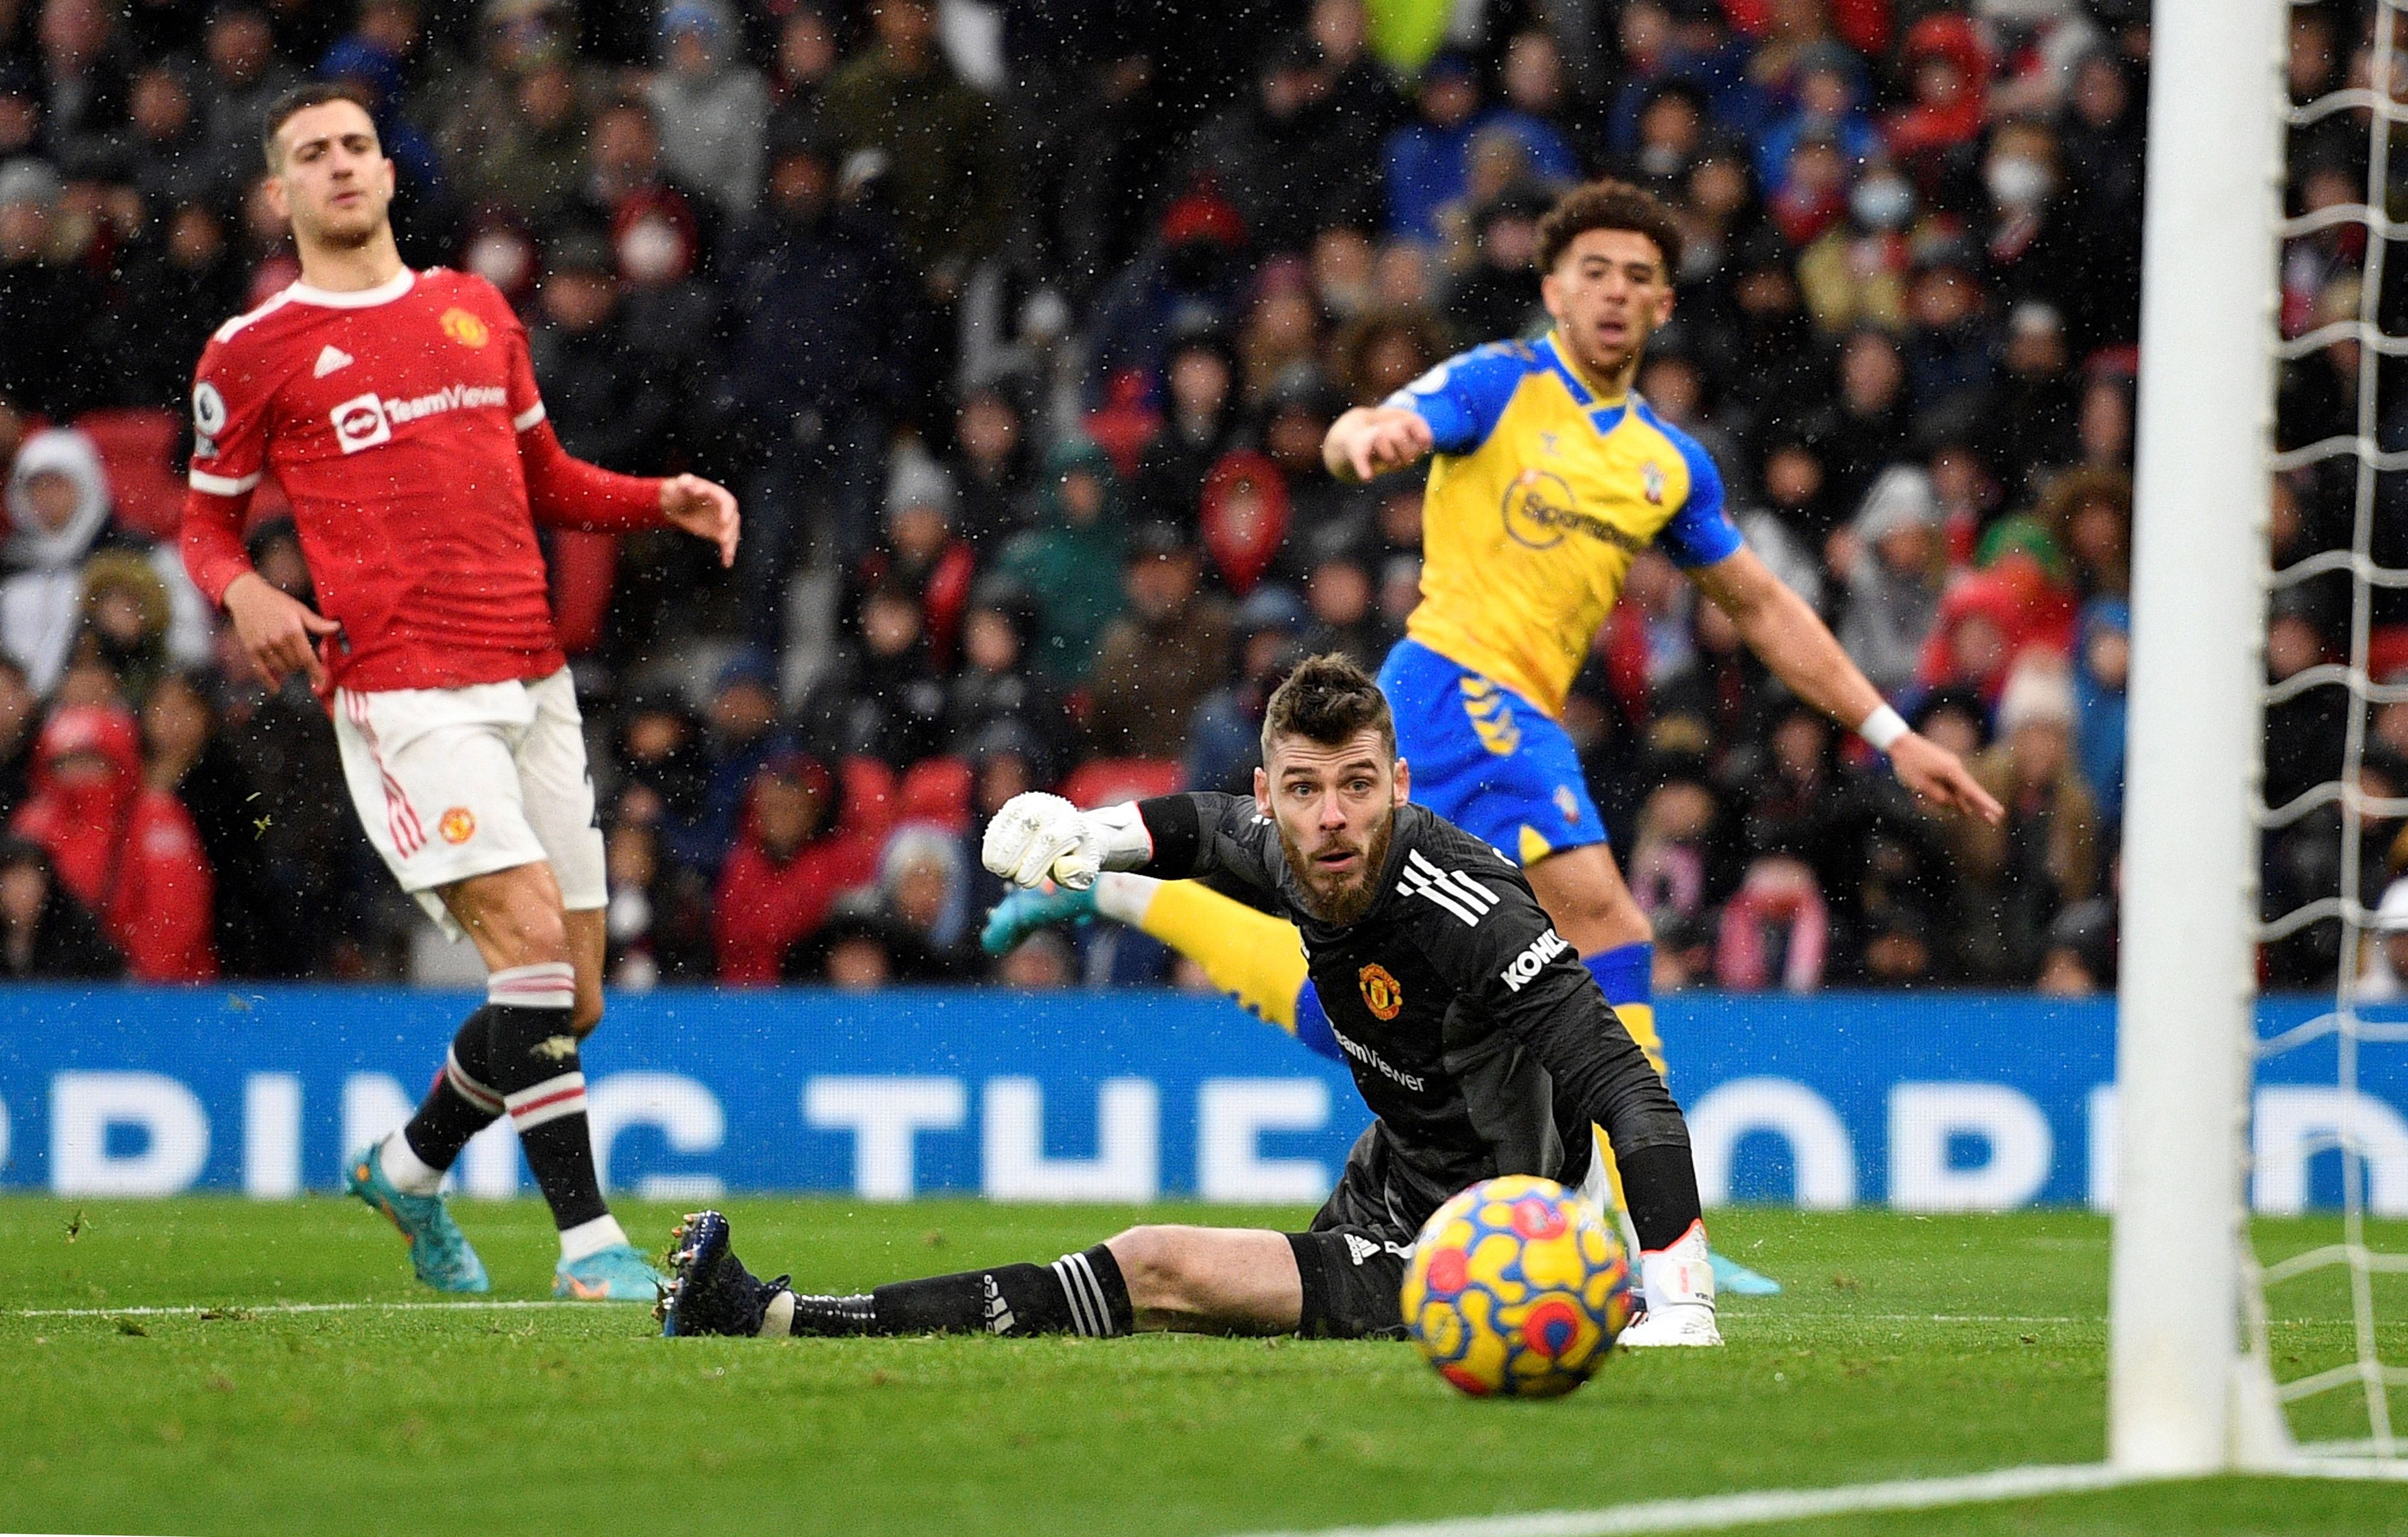 Manchester United 1-1 Southampton Highlights: Jadon Sancho scores his first Premier League goal at Old Trafford but United blow their lead once again